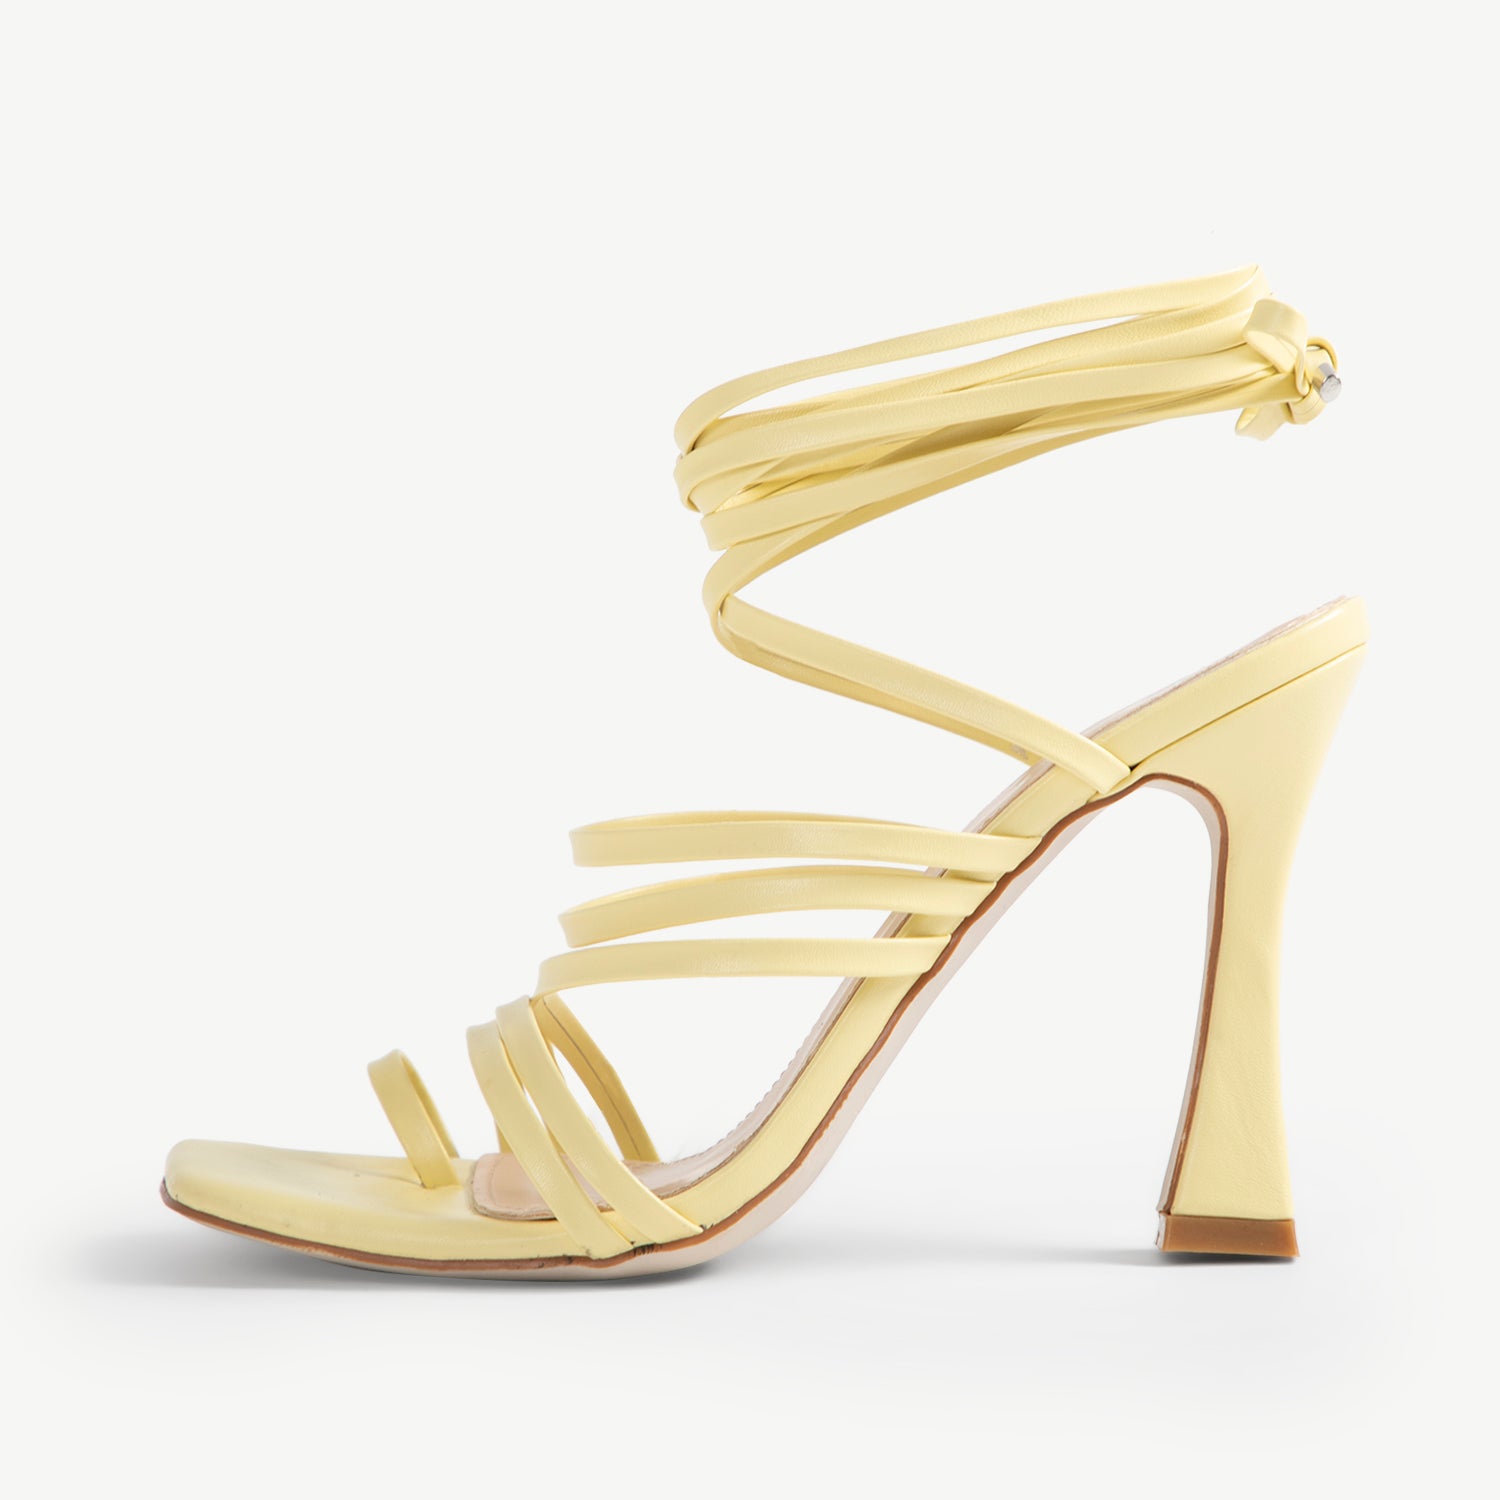 RAID Credence Lace Up Heel in Butter Yellow